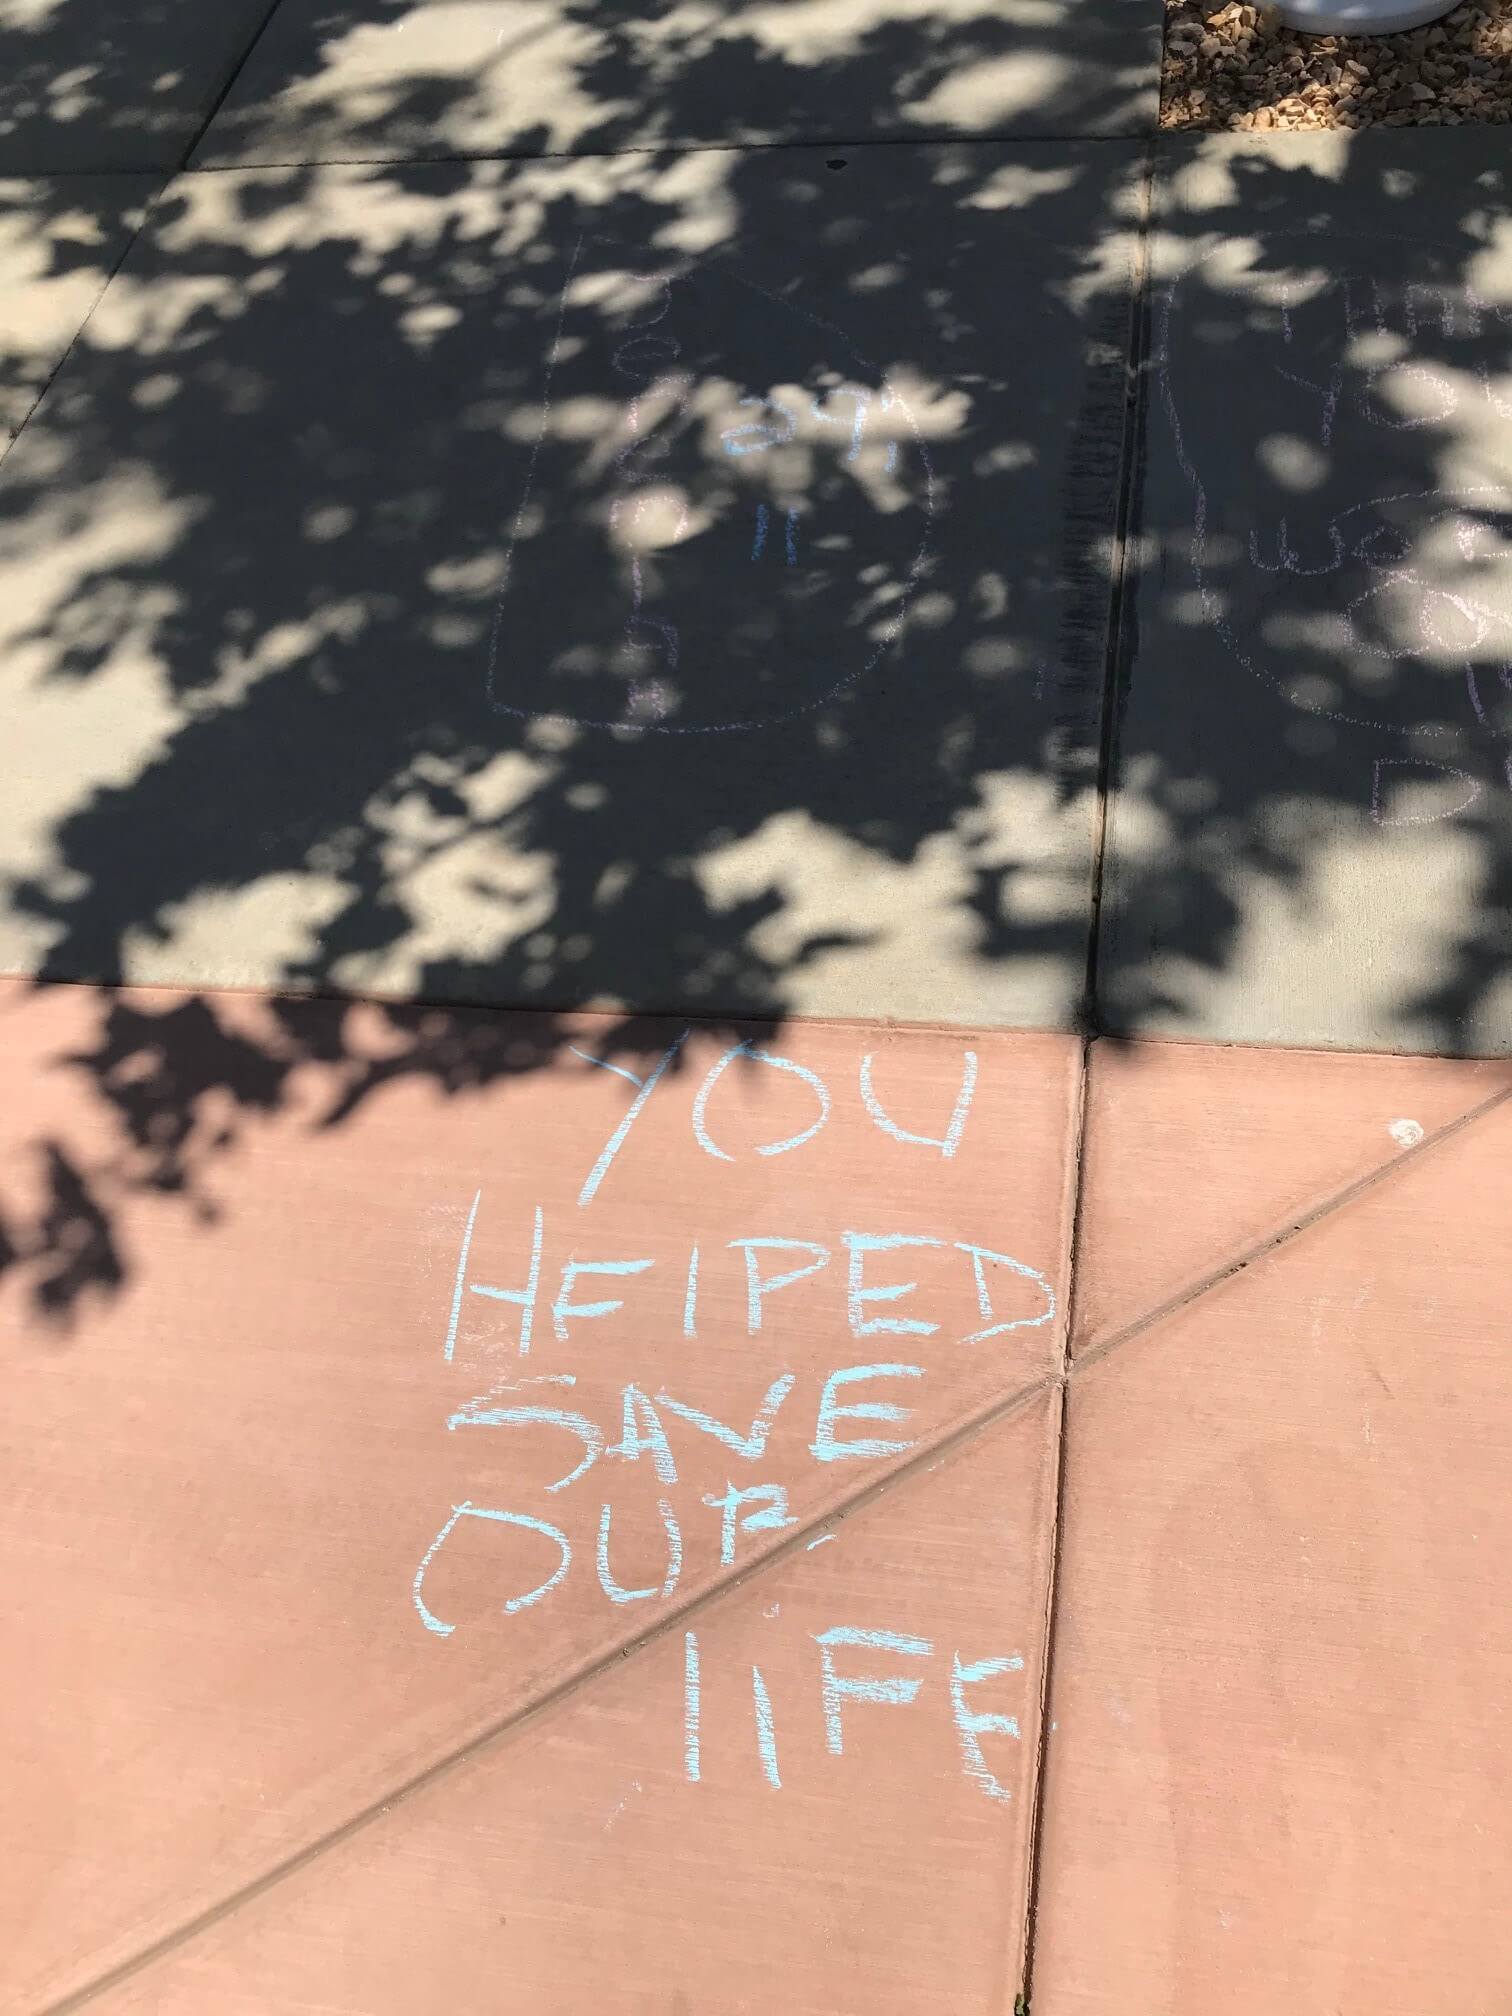 Chalk drawing that says "you helped save our life"